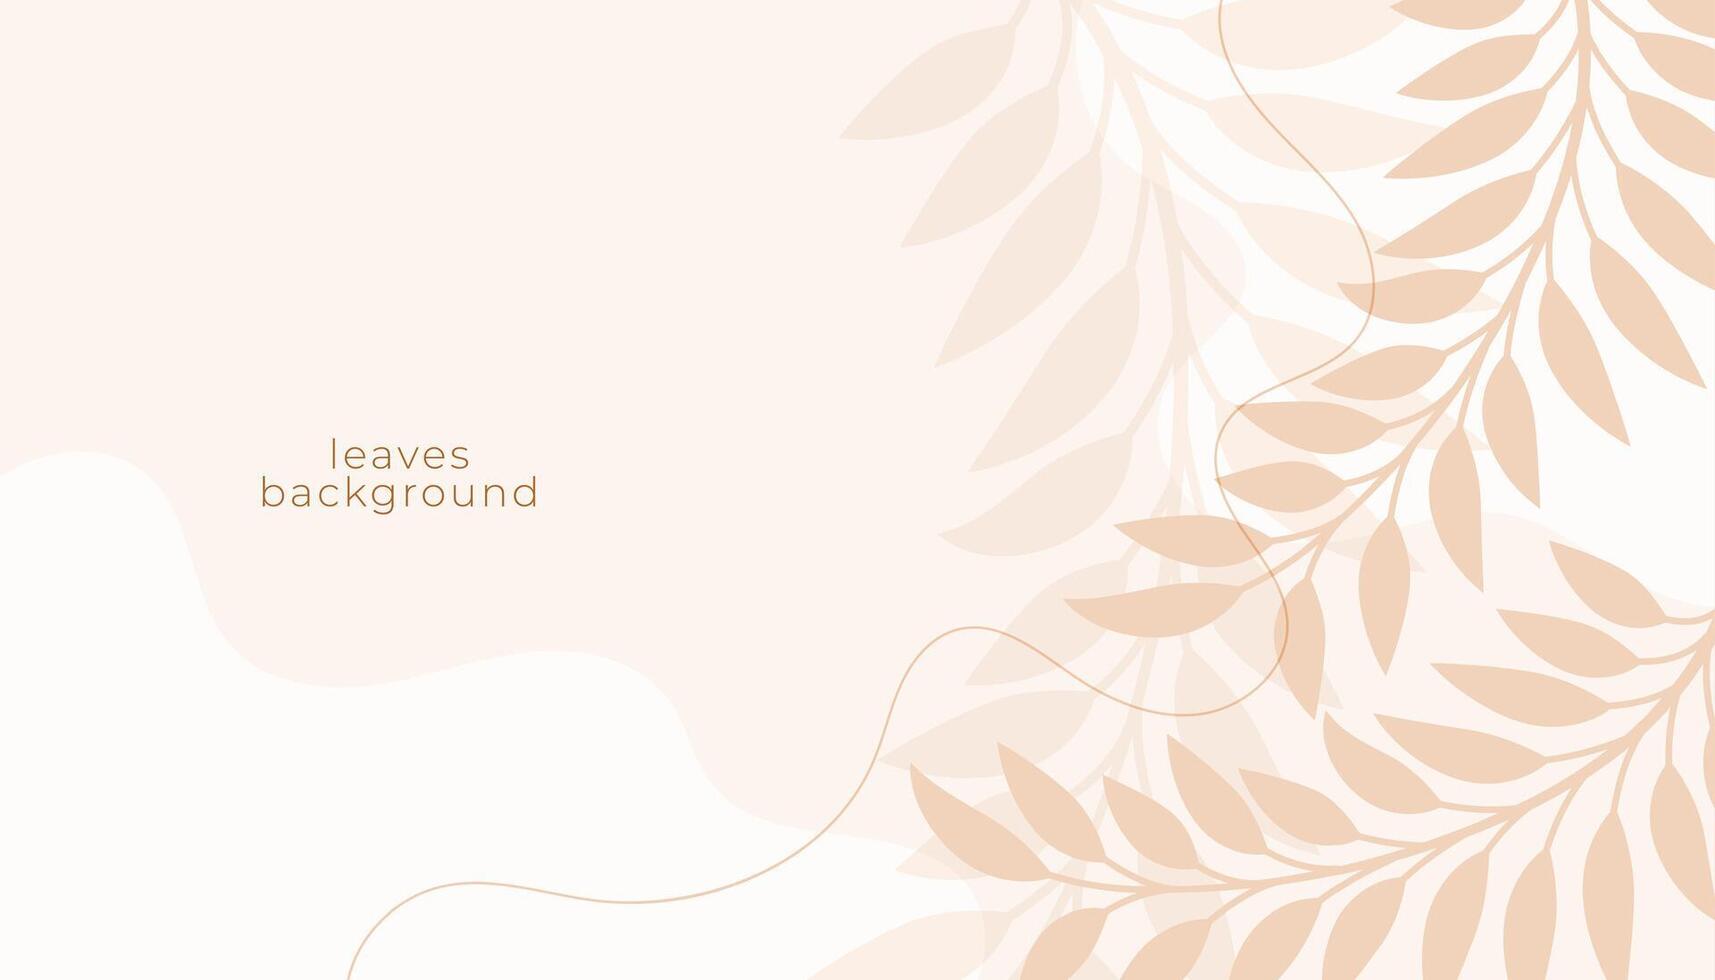 background with decorative leaves design vector